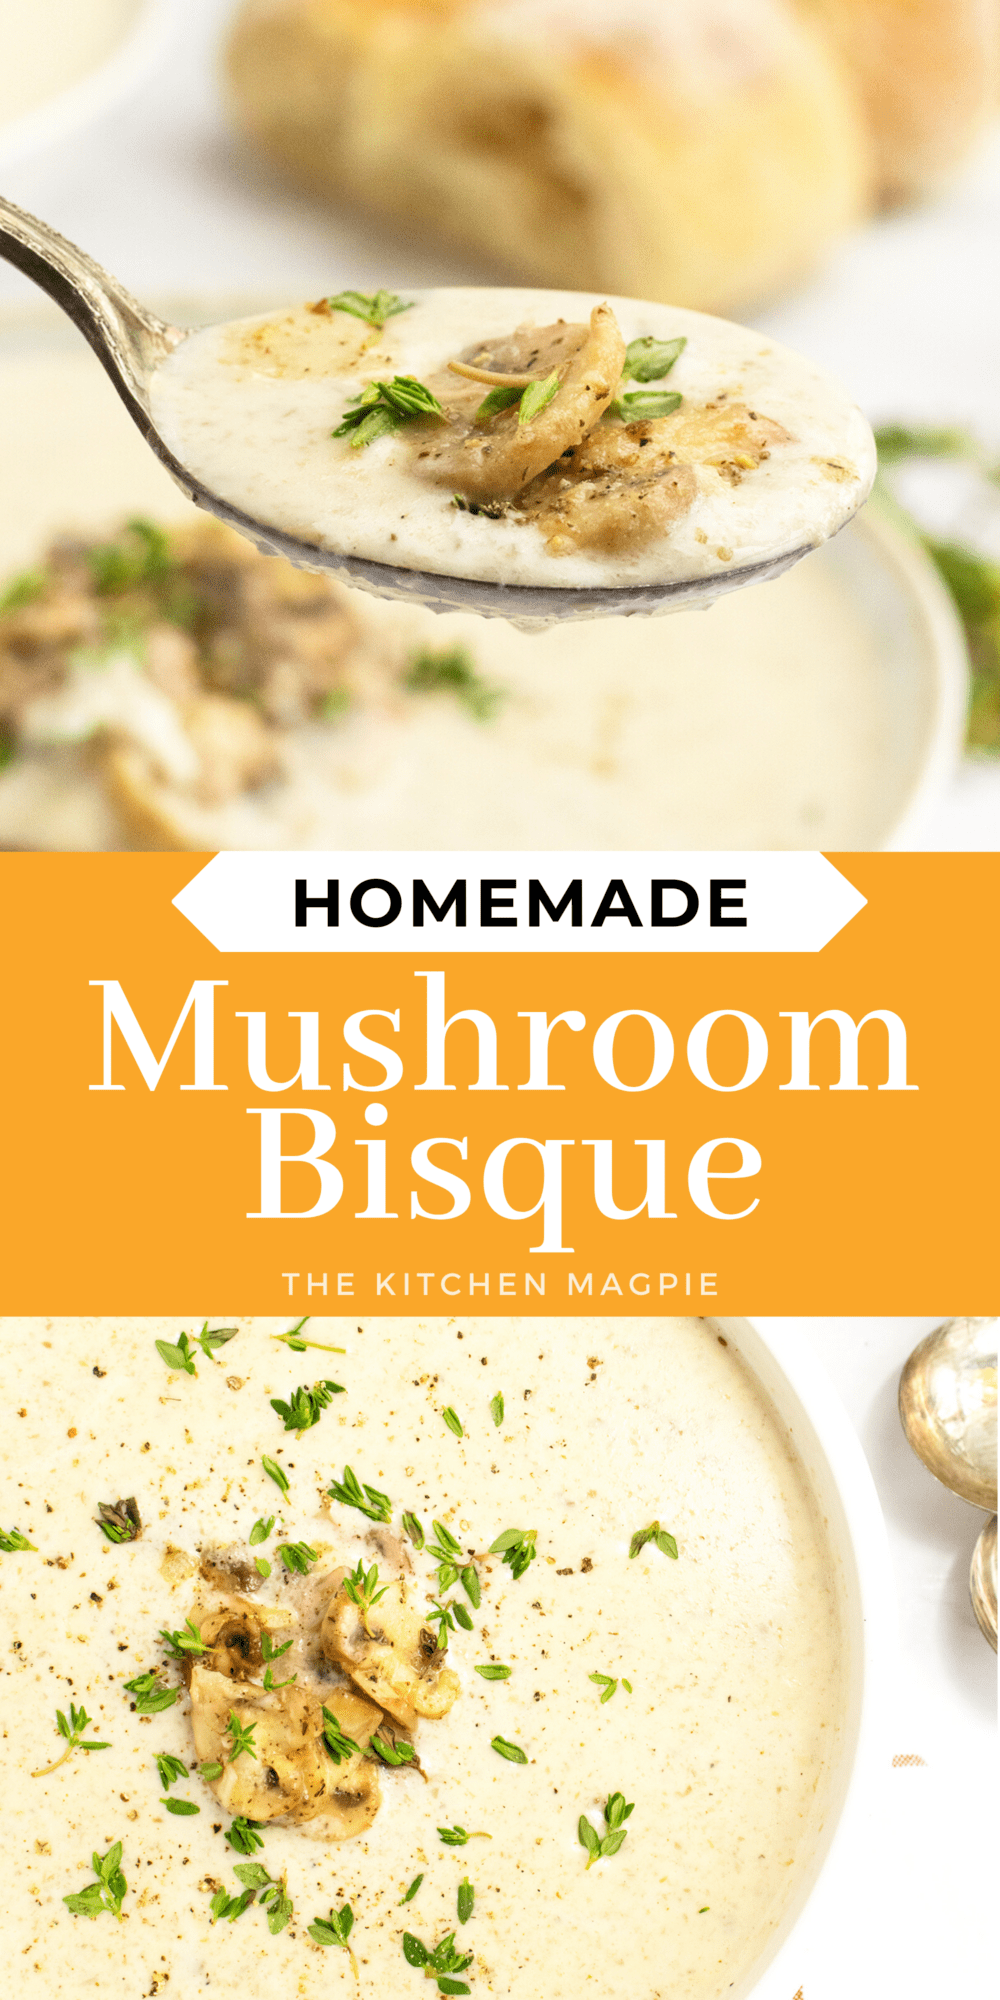 Creamy, rich, and packed with mushroom flavor, this is the soup to make if you love mushrooms.